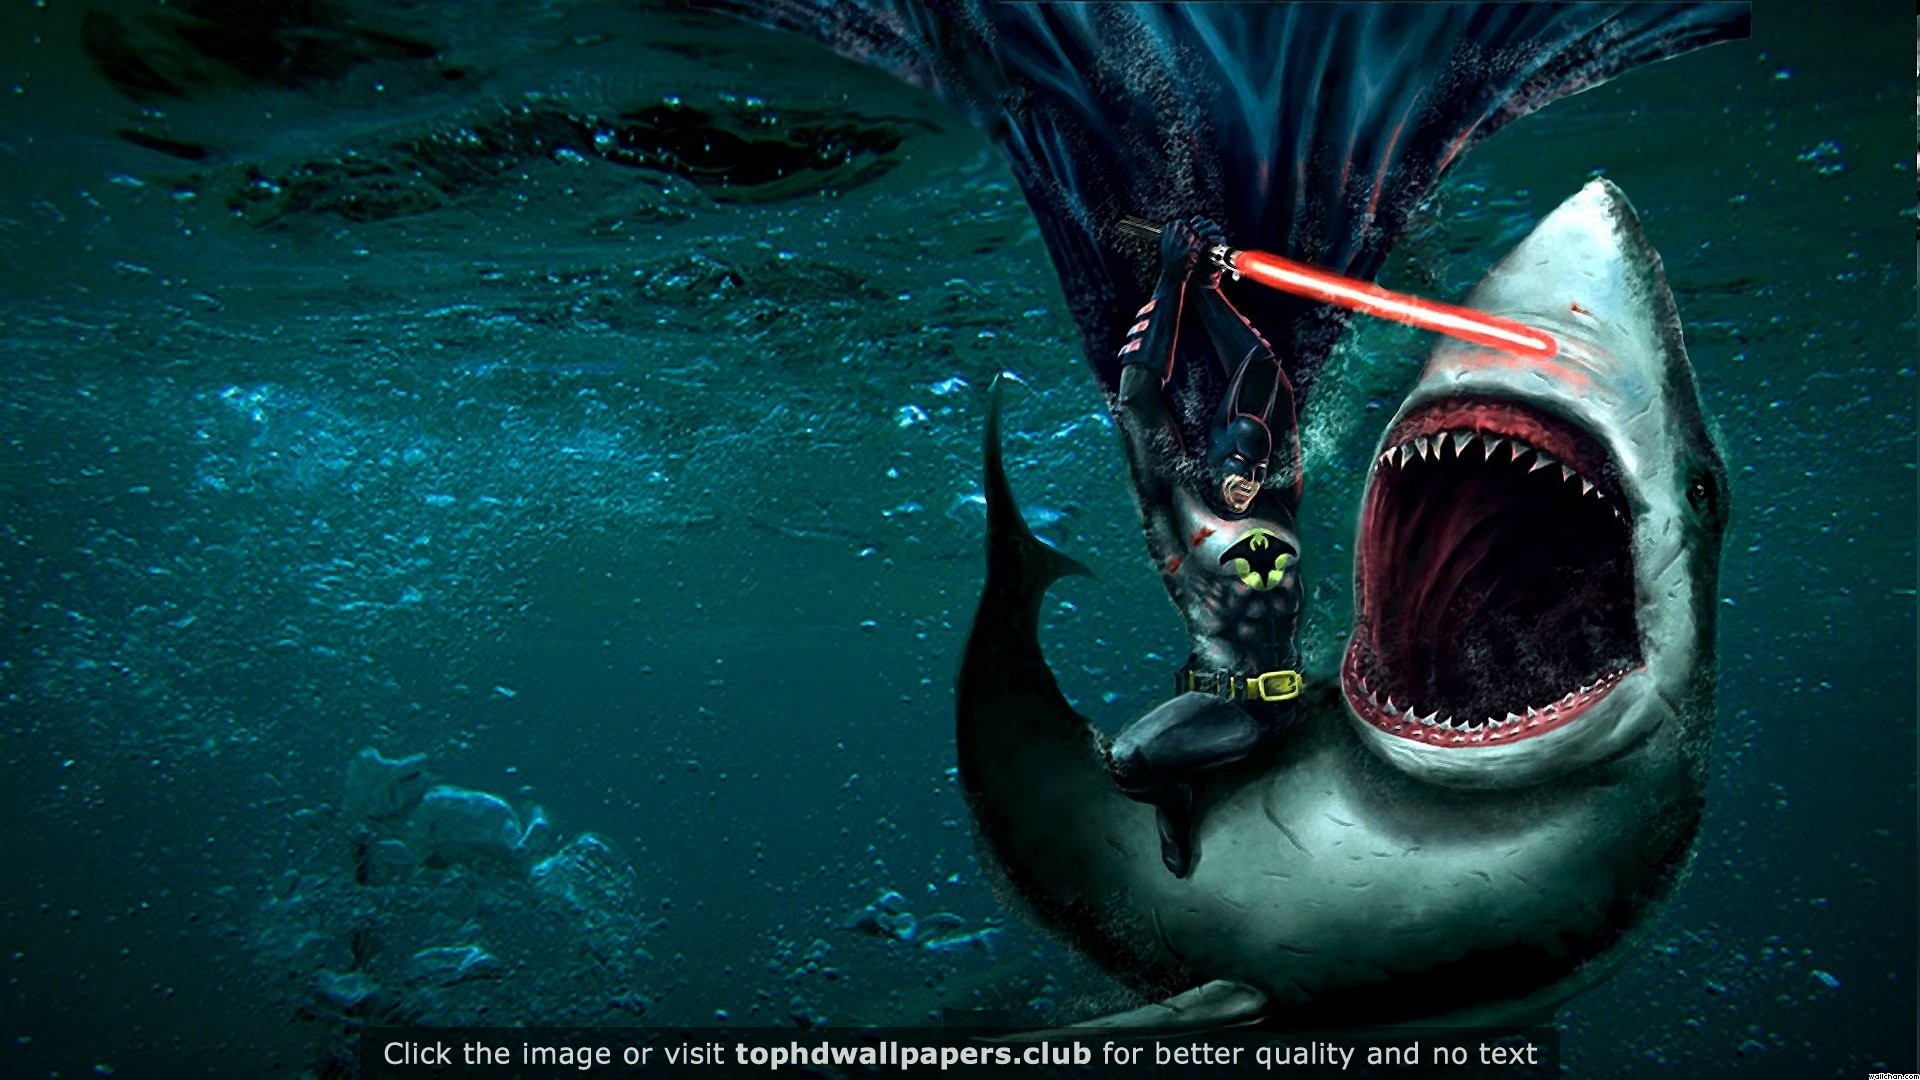 1920x1080 Batman Fighting a Shark With a Lightsaber 4K or HD wallpaper for your PC,  Mac